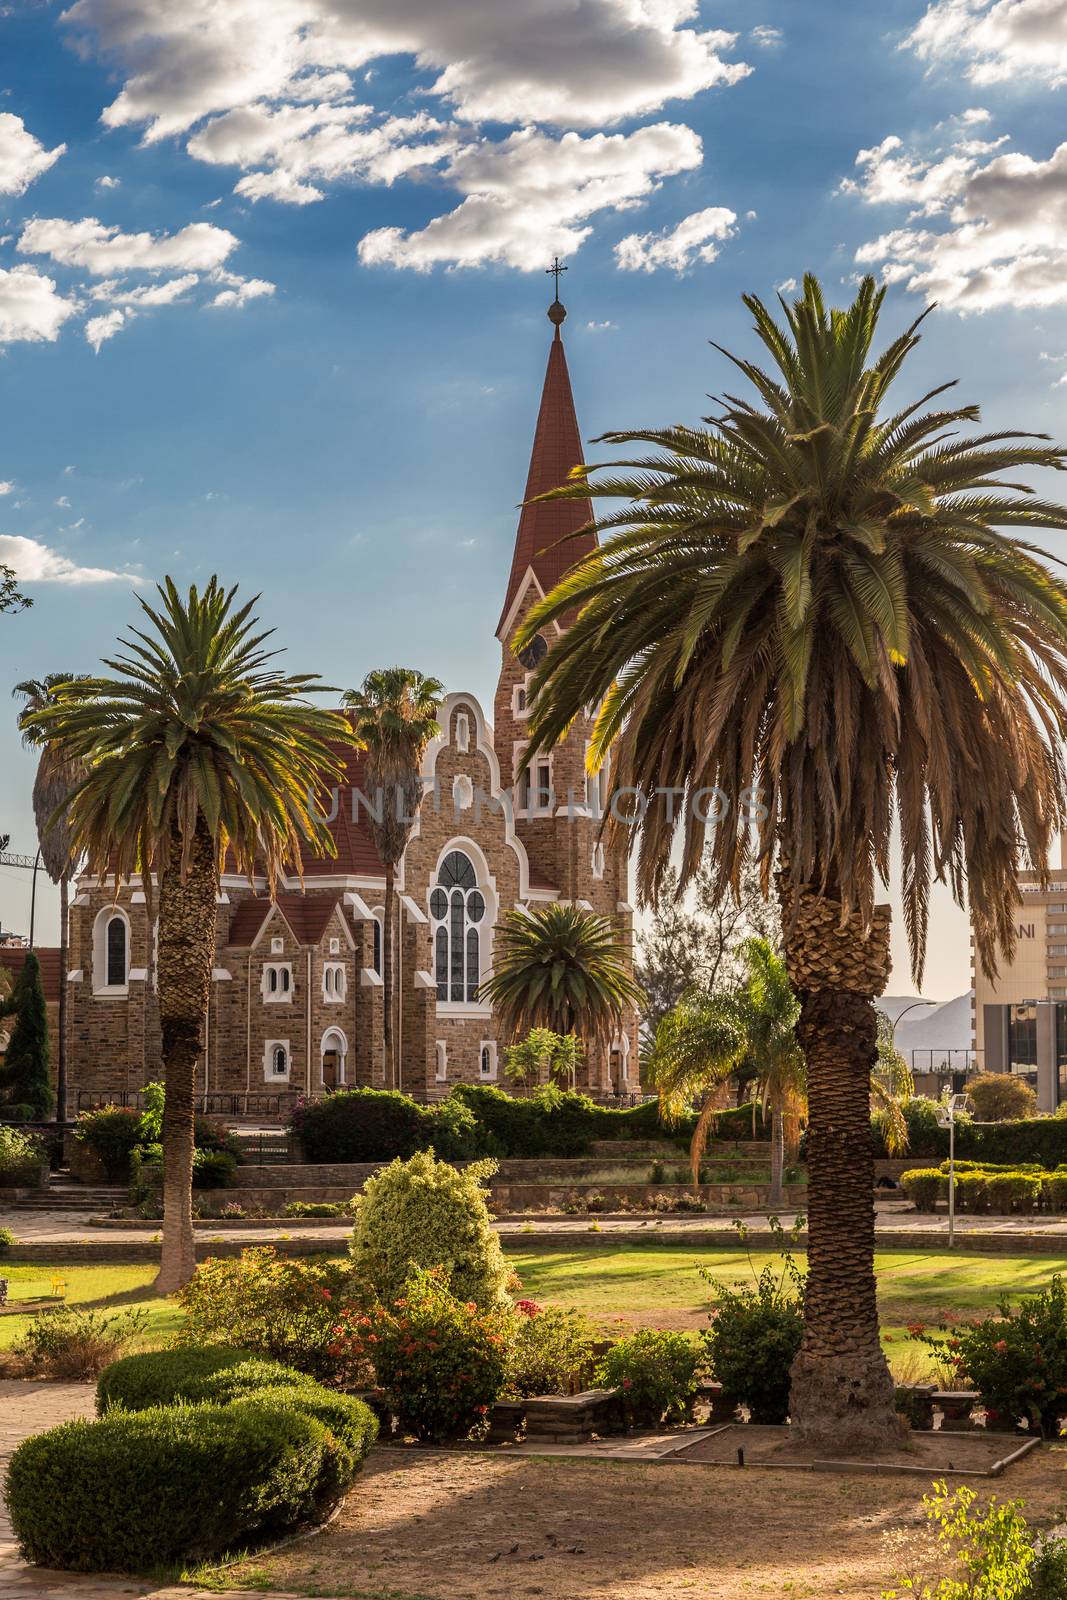 Luteran Christ Church and park with palms in front, Windhoek, Namibia